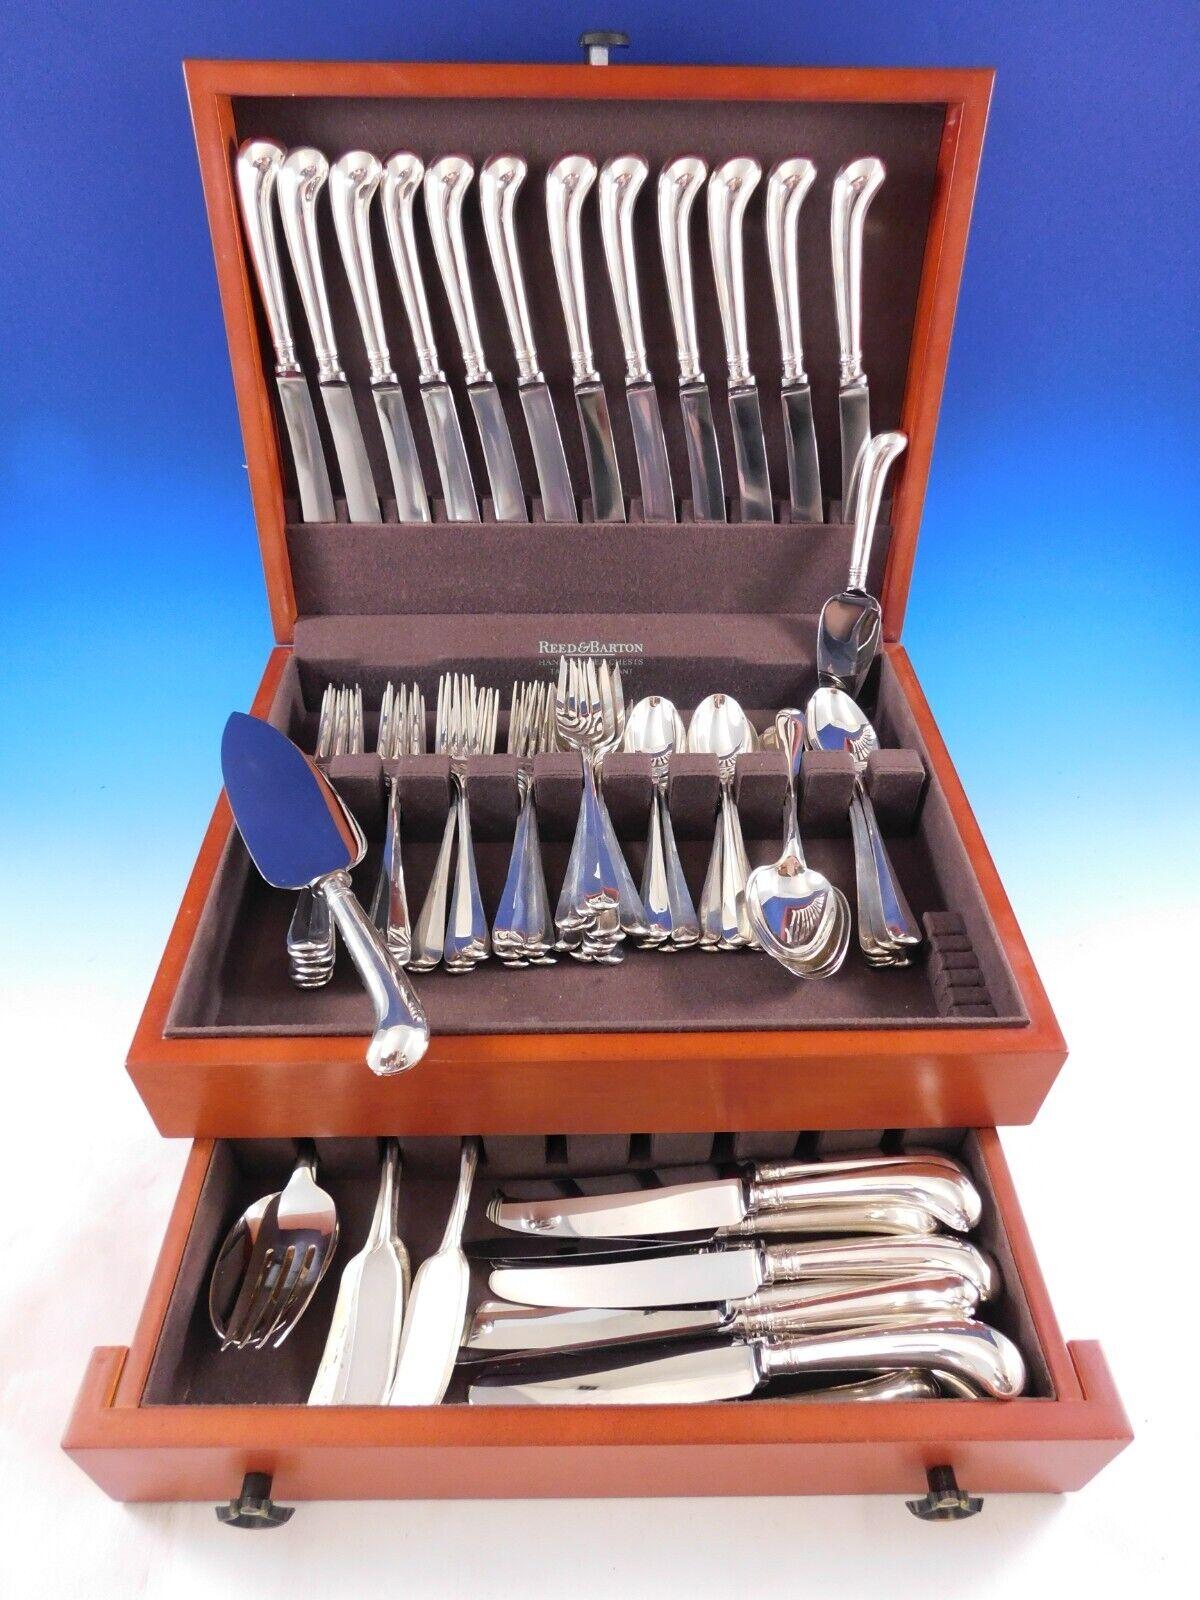 Monumental Dinner & Lunch Size Rat Tail by Tiffany and Co. (made in England) Sterling Silver Flatware set - 100 pieces. This pattern features fabulous pistol grip handles. This set includes:

12 Dinner Knives with smooth pistol grip handle, 9